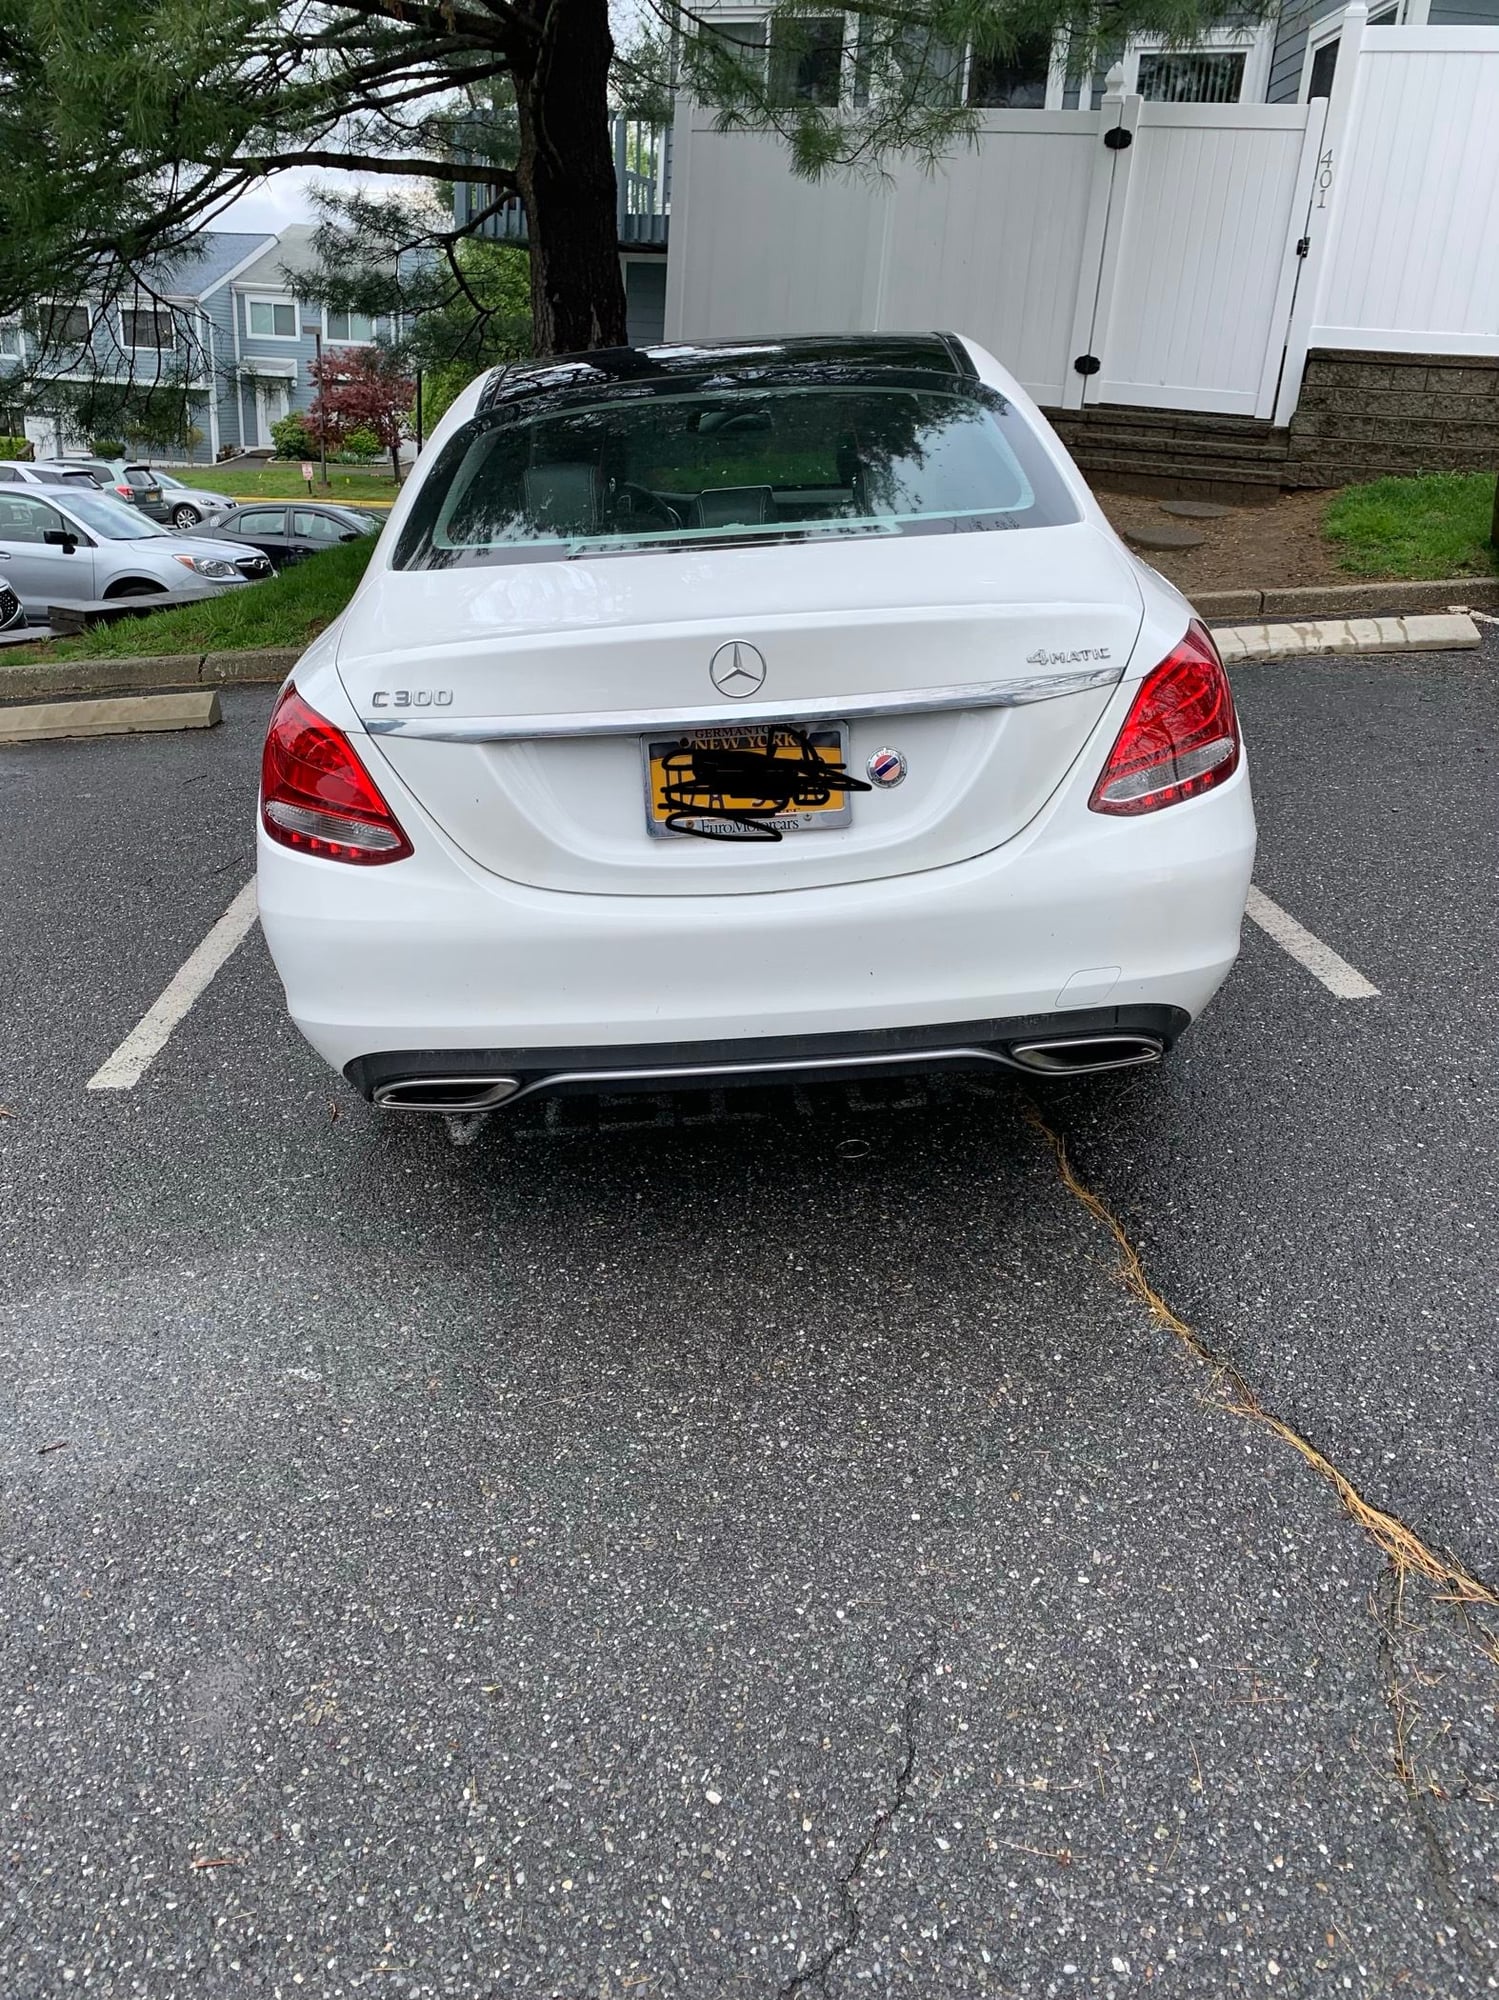 2017 Mercedes-Benz C300 - white 2017 mercedes c300 4matic lease transfer $250 per month - Used - VIN 55SWF4KB8HU209108 - 21,000 Miles - 4 cyl - AWD - Automatic - Sedan - White - Mount Kisco, NY 10549, United States